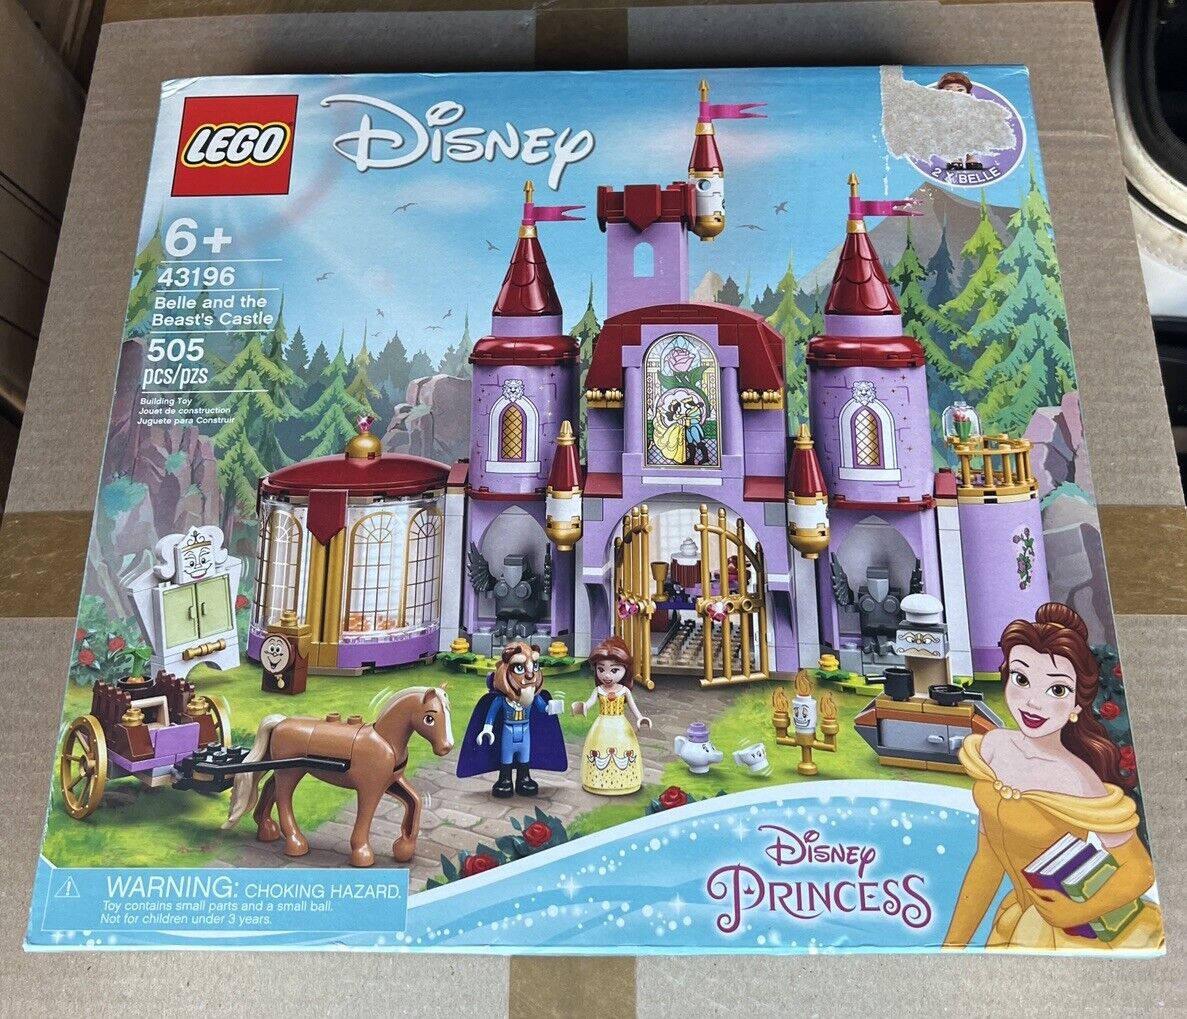 LEGO Disney 43196 Belle and the Beast's Castle Building Kit 505 Pcs NEW